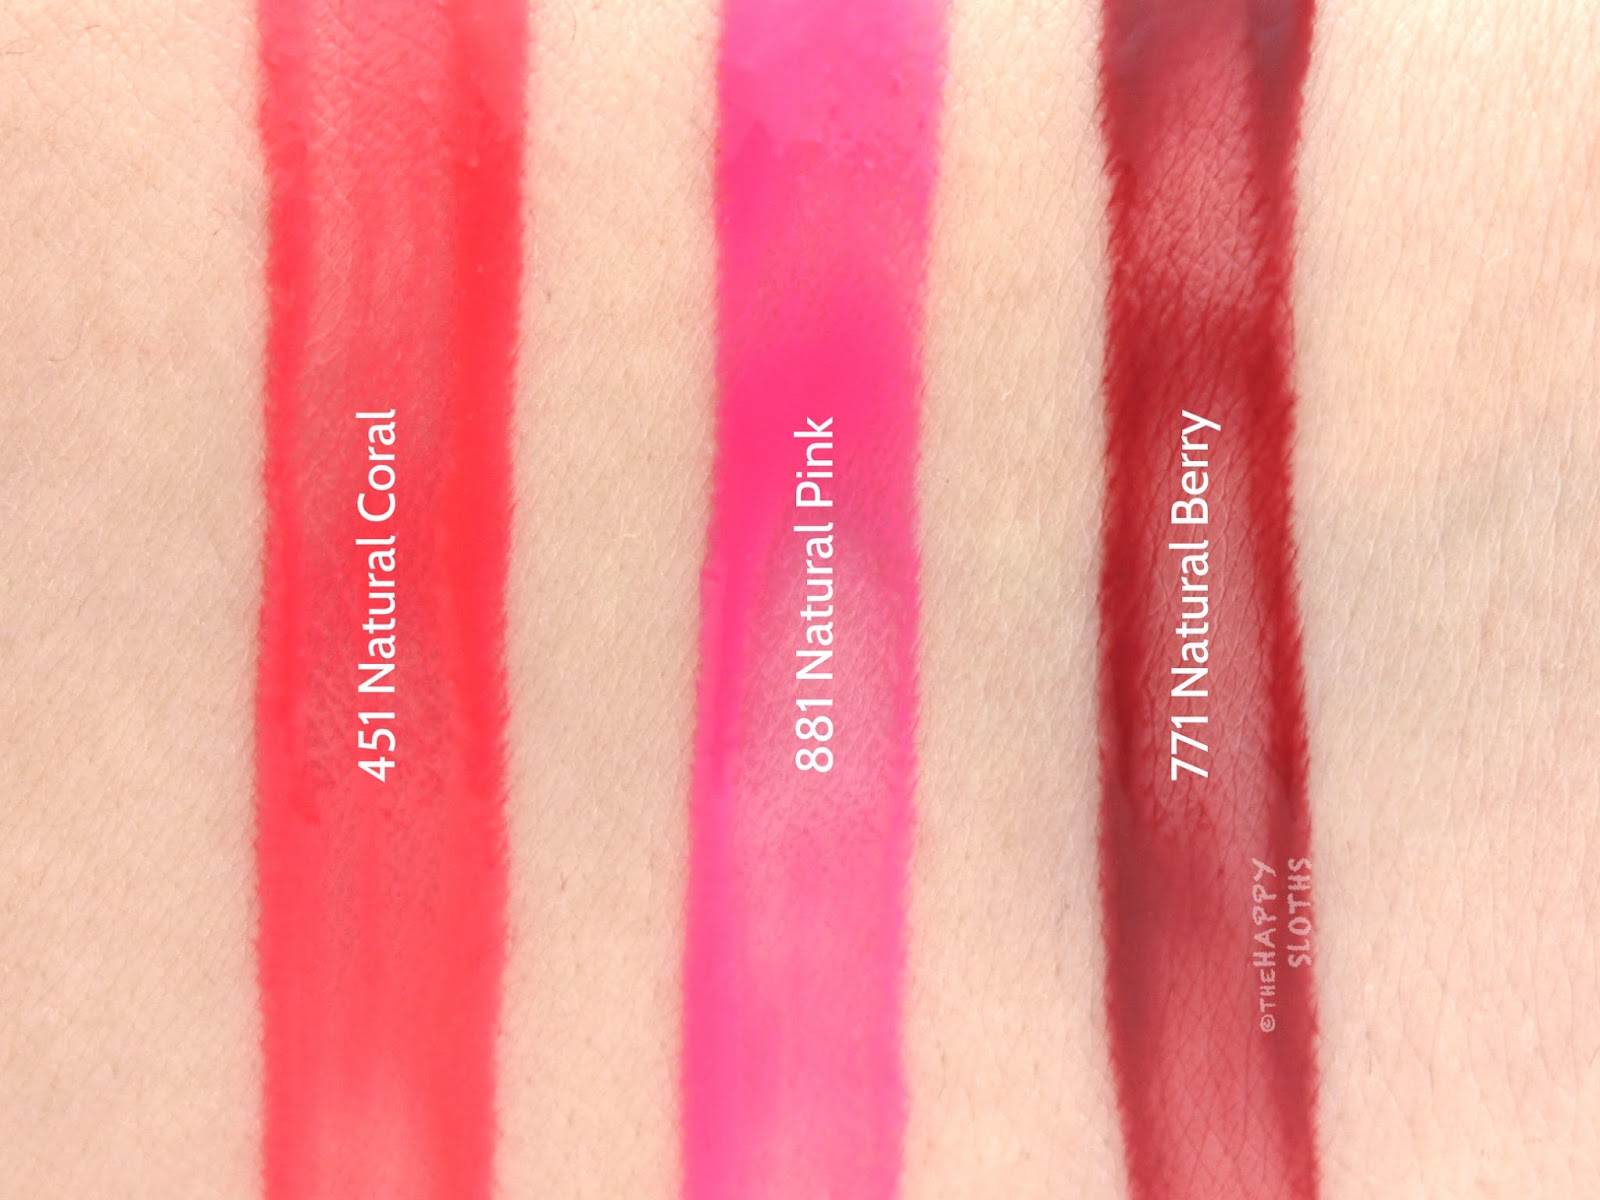 Dior Addict Lip Tattoo Long-Wear Colored Tint: Review and Swatches